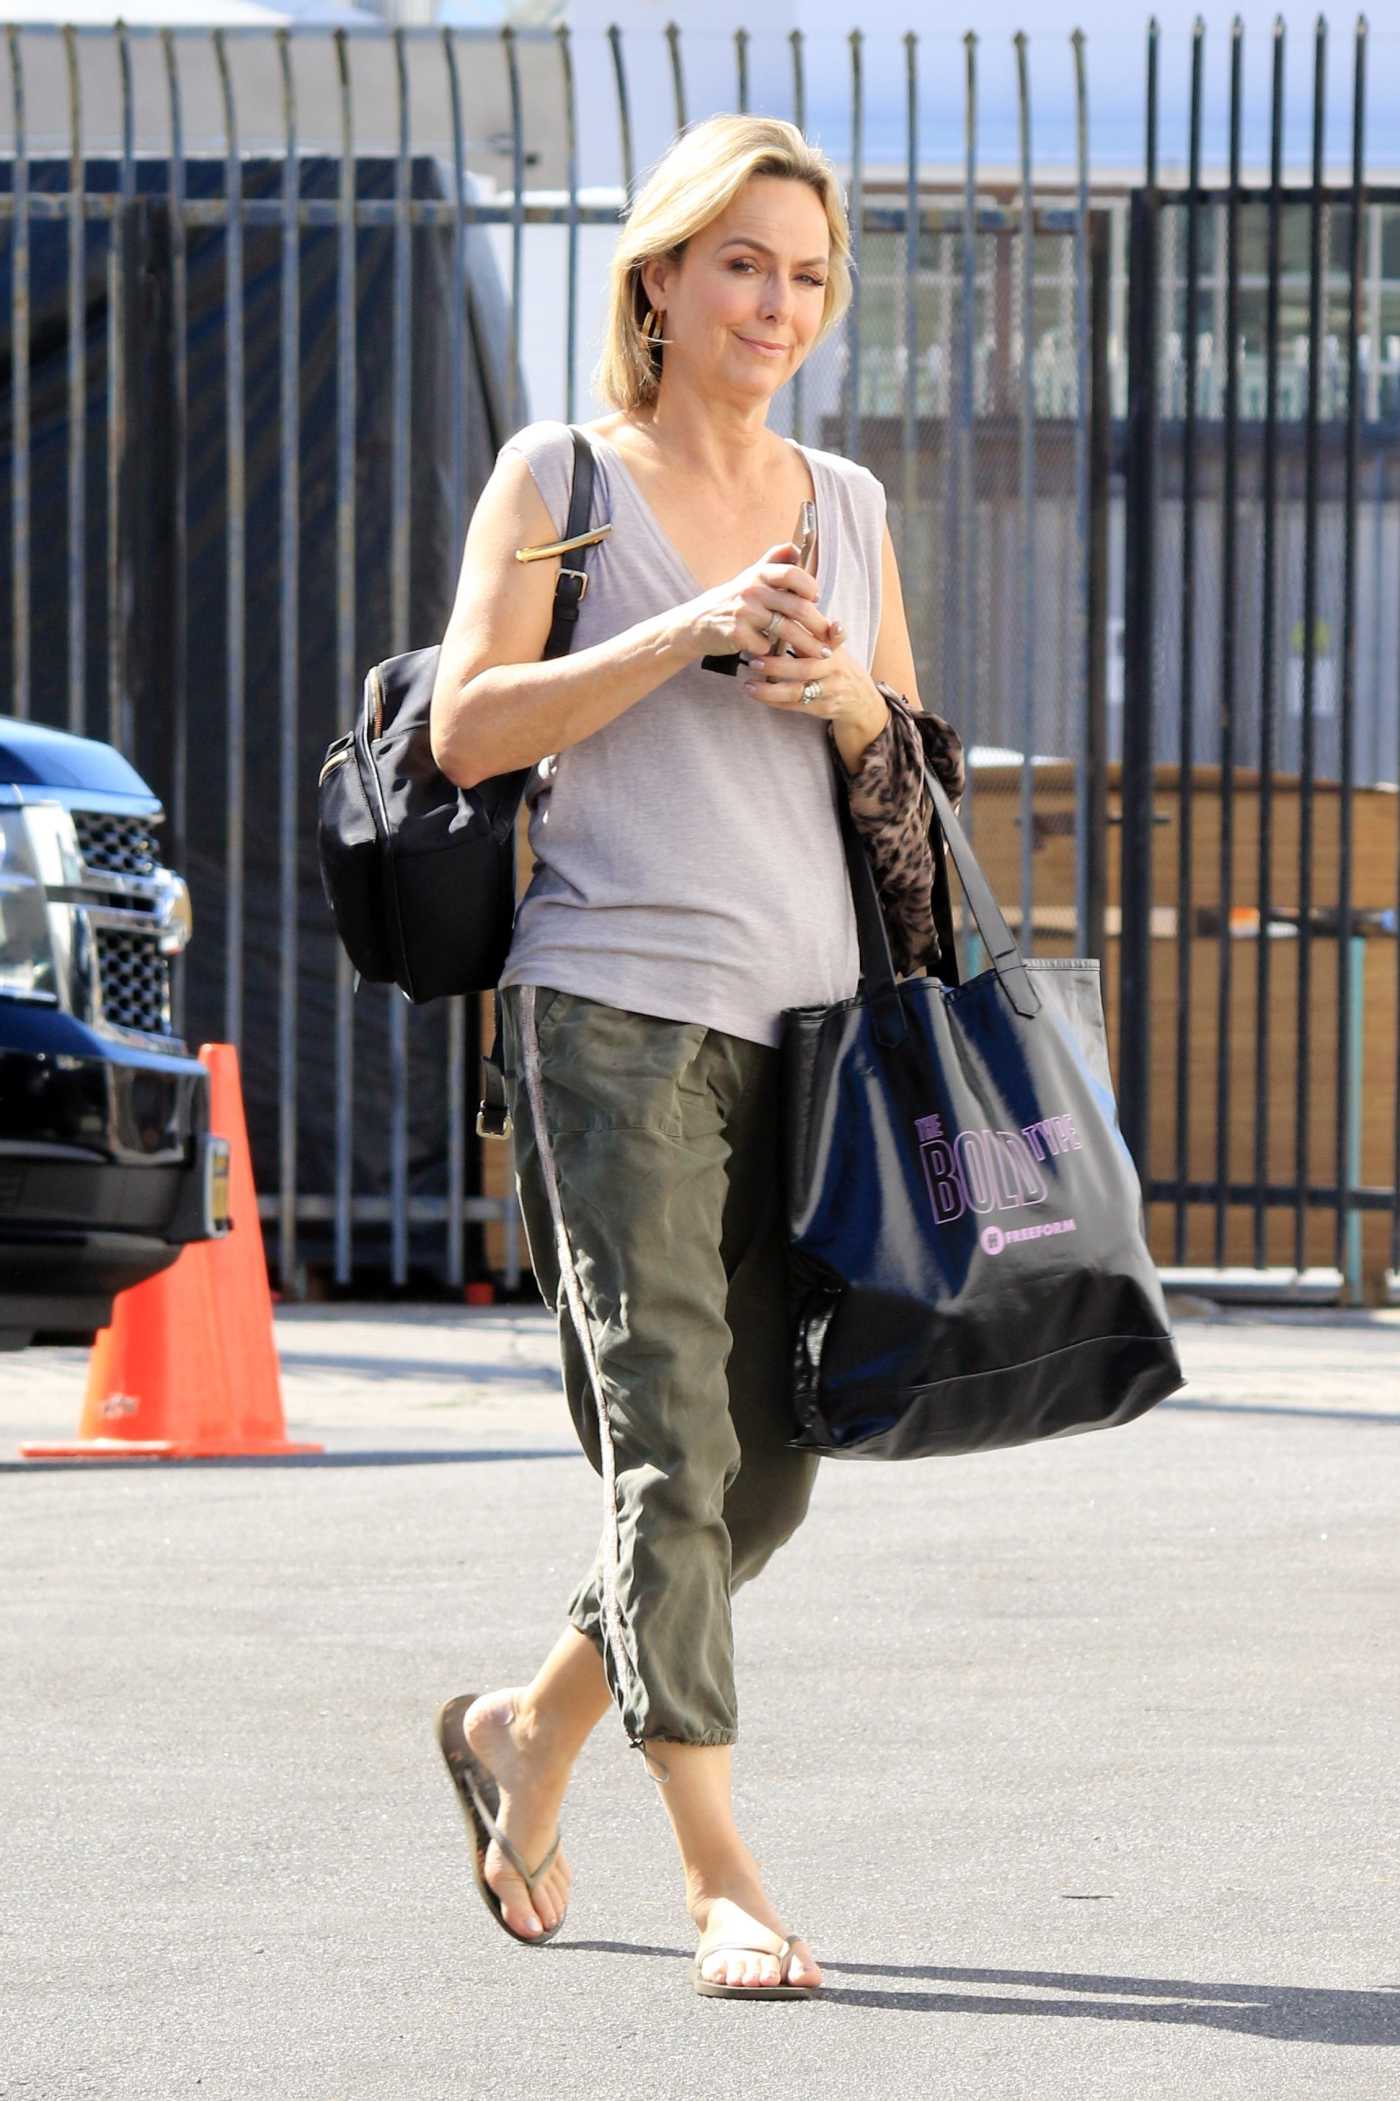 Melora Hardin in a Grey Tank Top Arrives for Practice at The Dancing With The Stars Rehearsal Studio in Los Angeles 10/10/2021